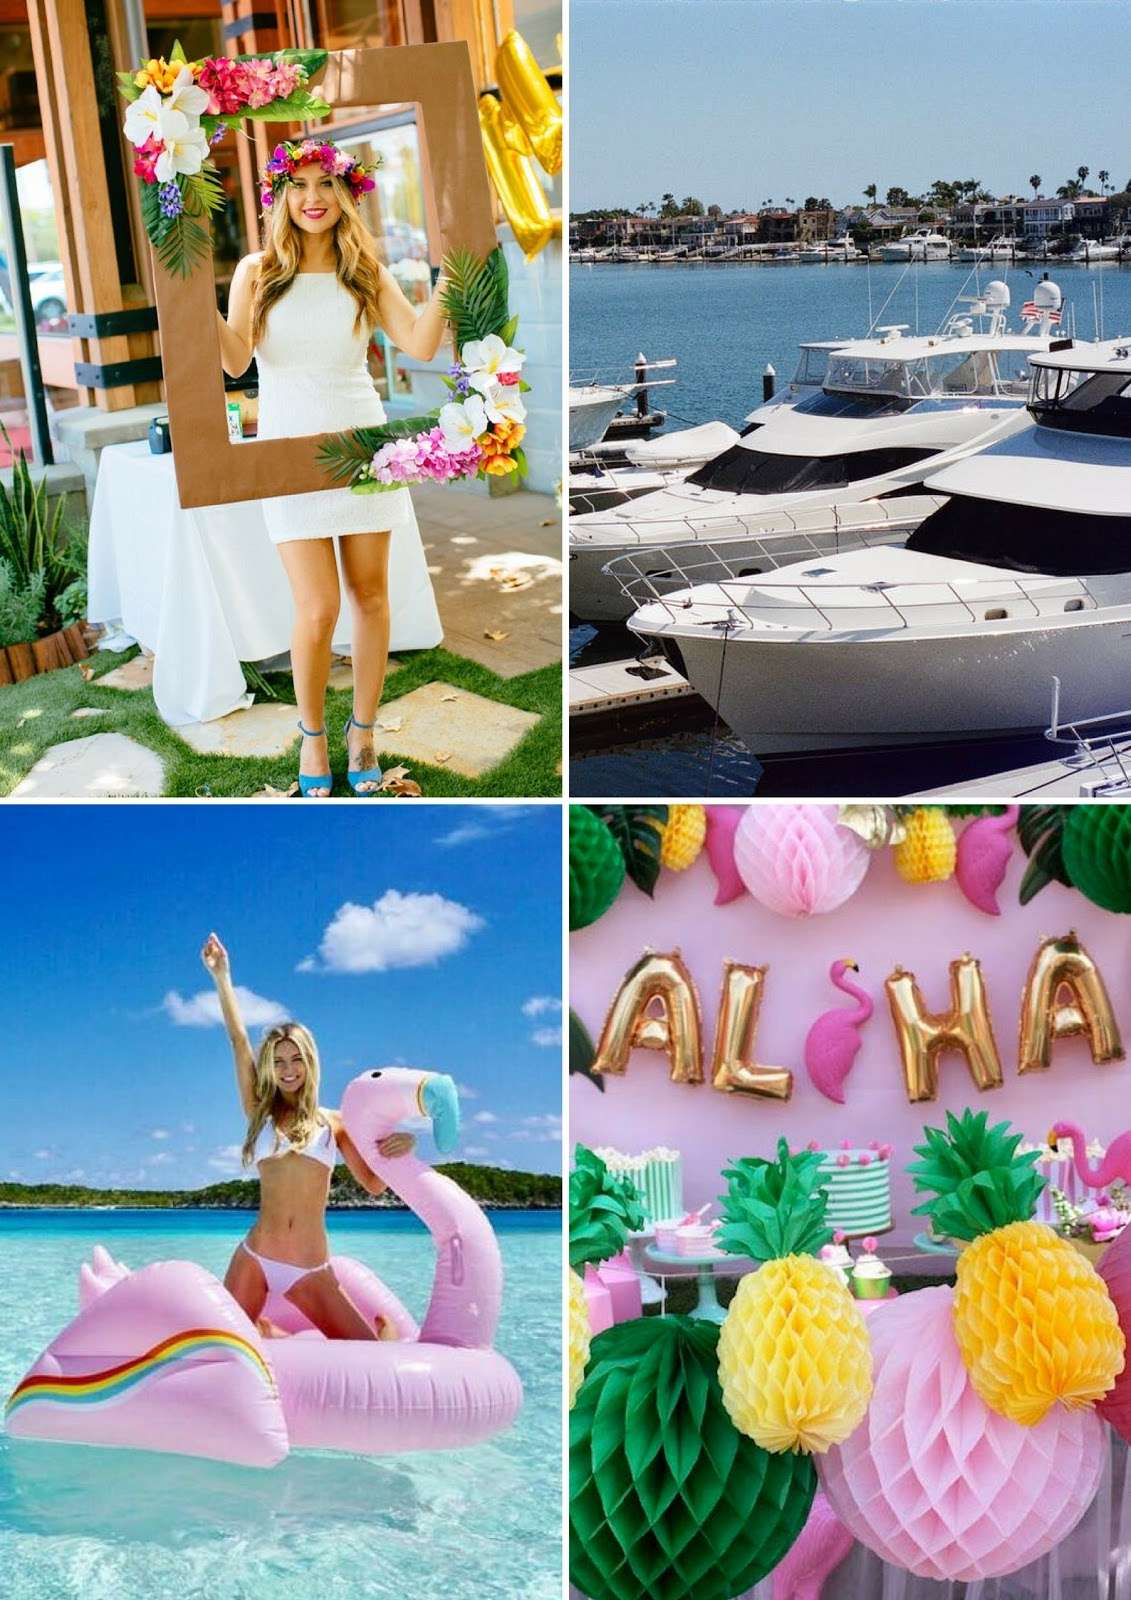 7 Amazing Party Theme Ideas Aboard A Yacht